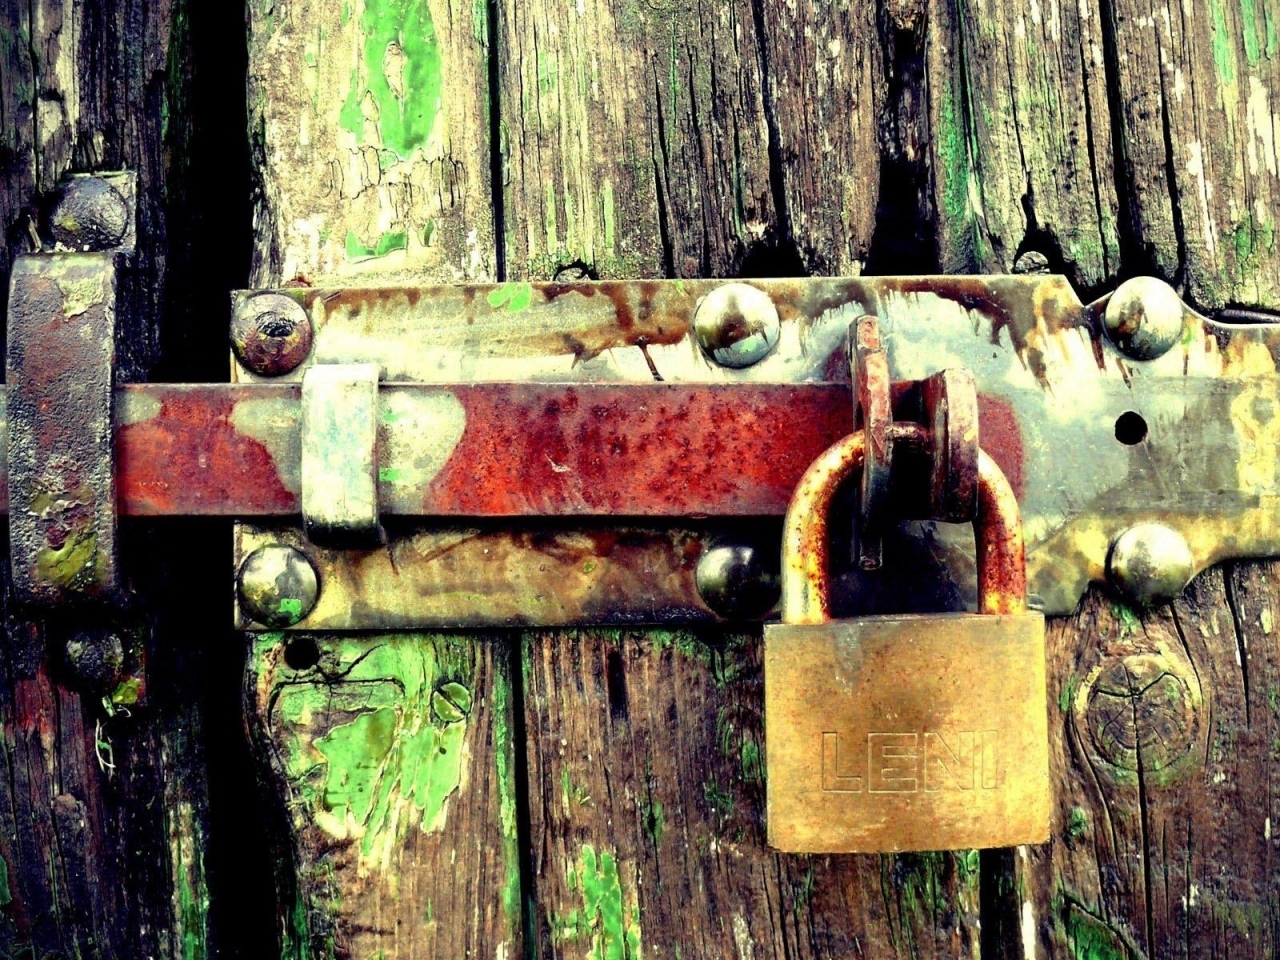 Padlock on the gate for 1280 x 960 resolution